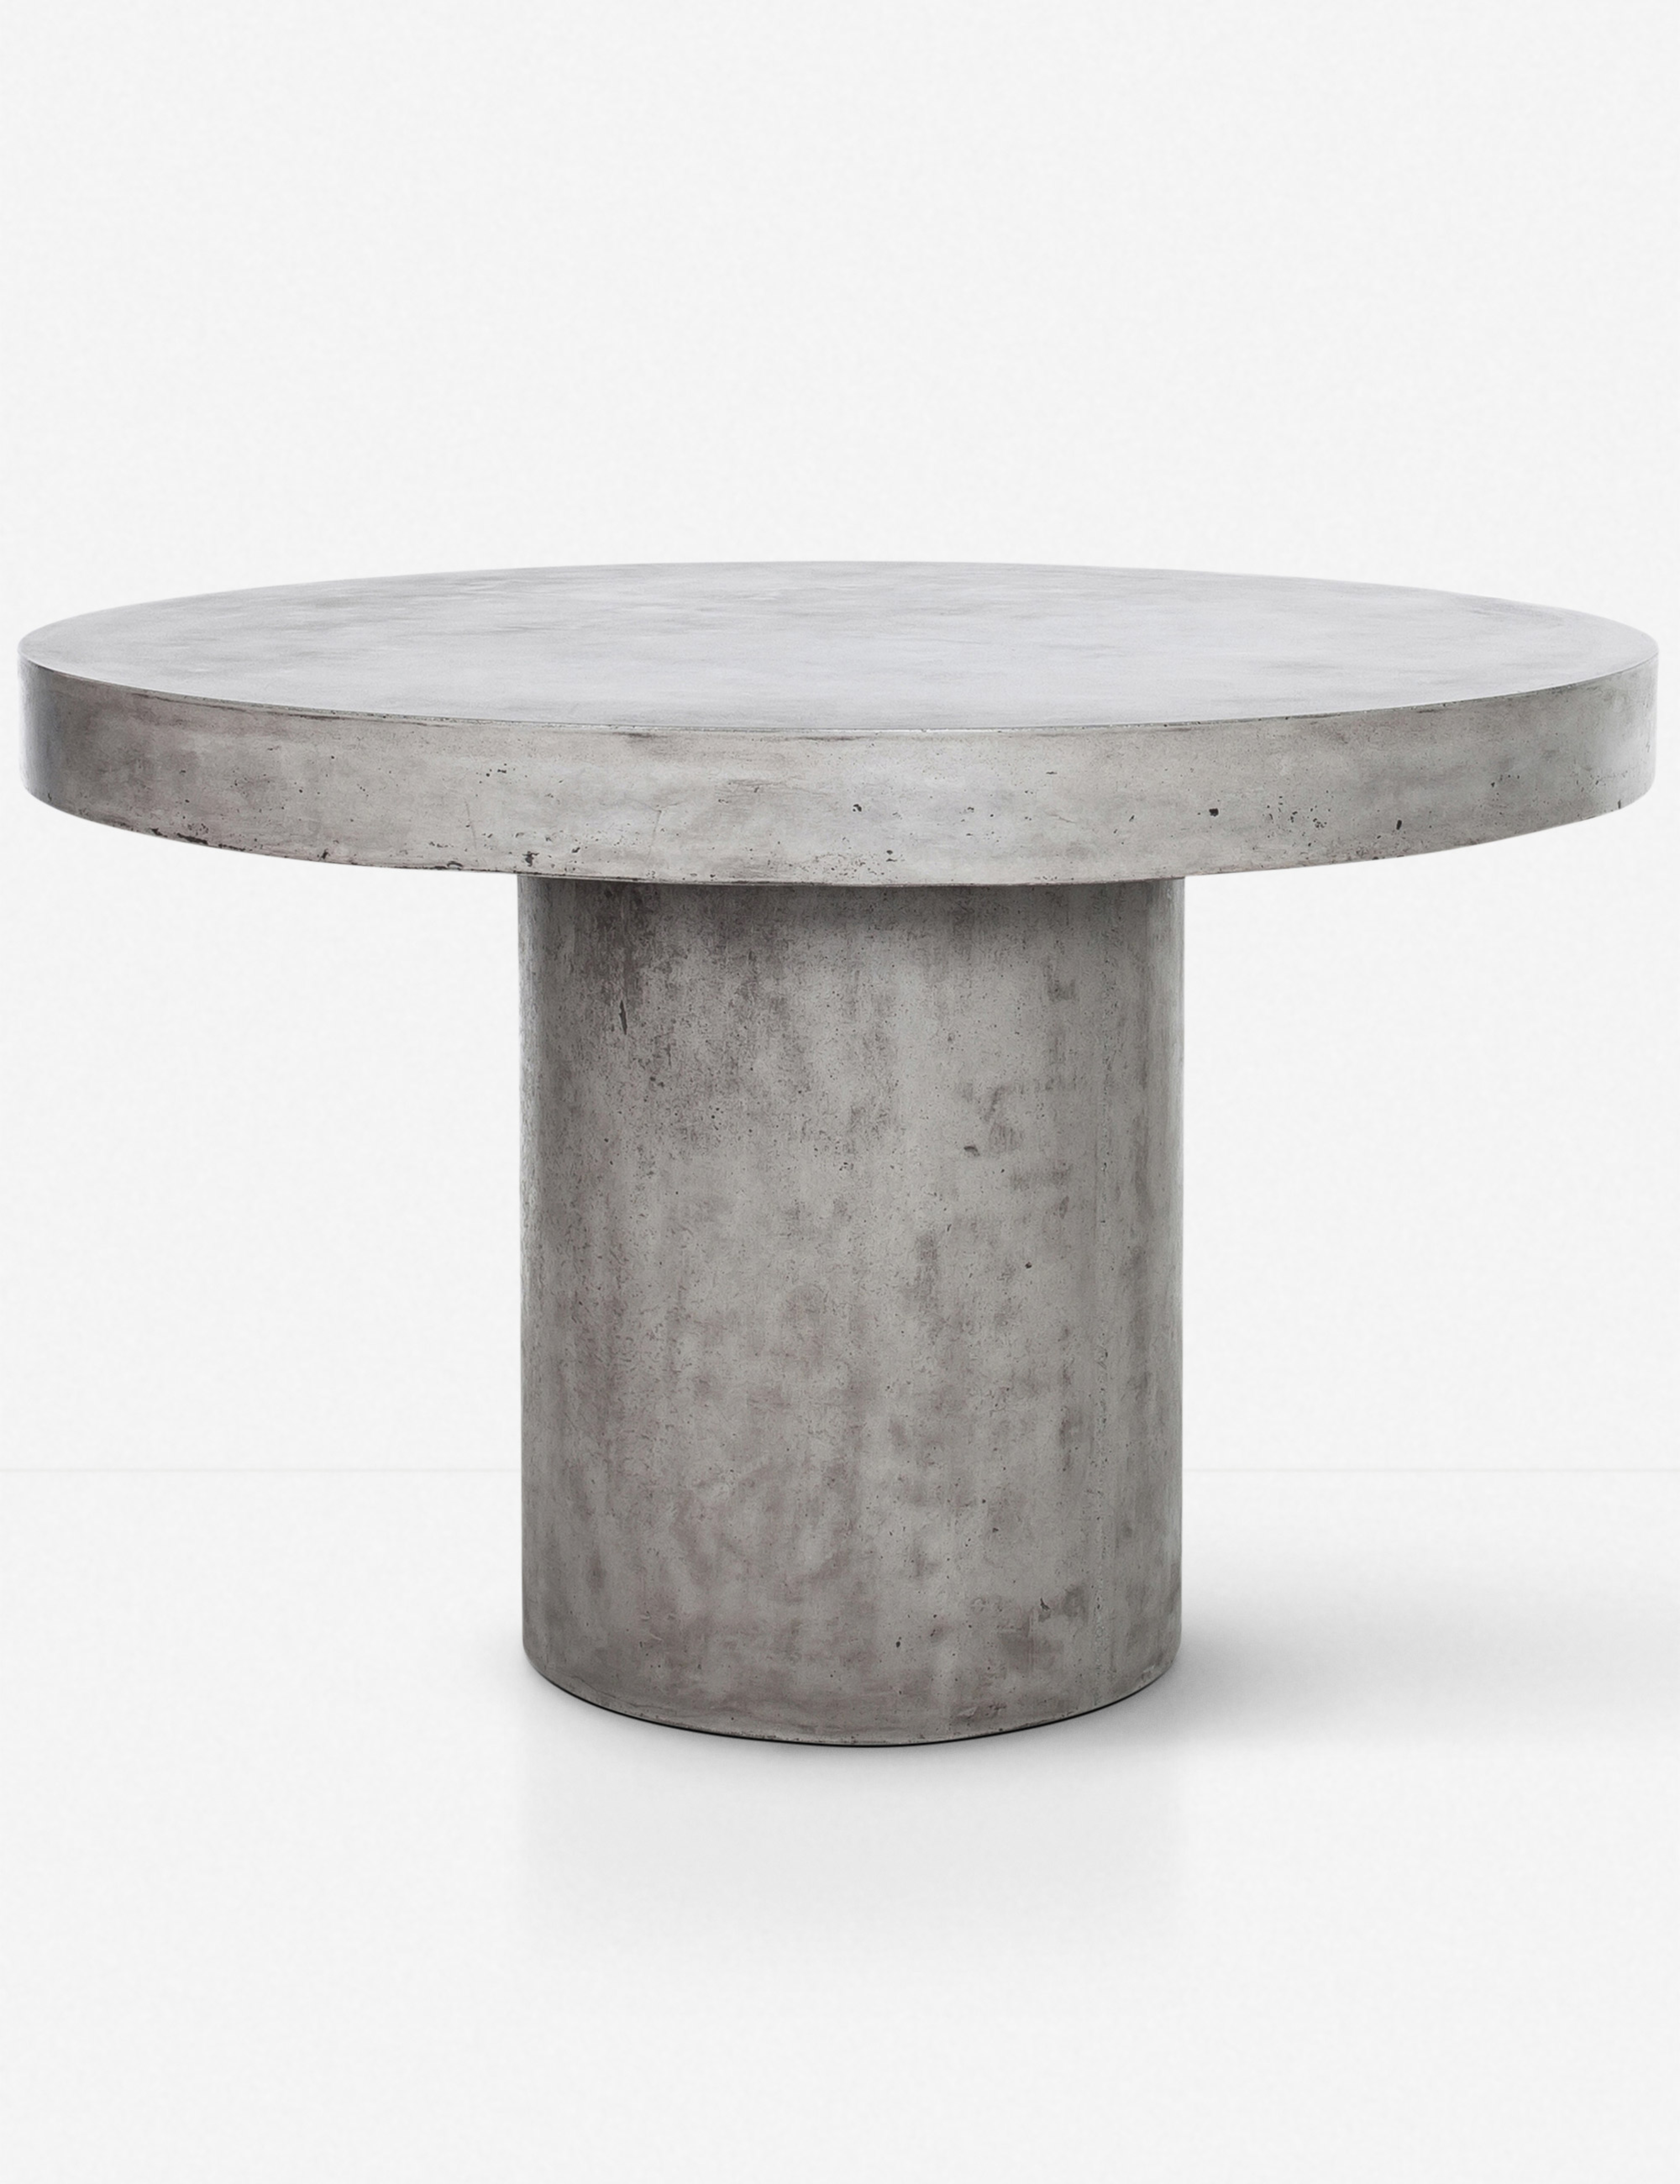 Stein Indoor / Outdoor Round Dining Table - Lulu and Georgia